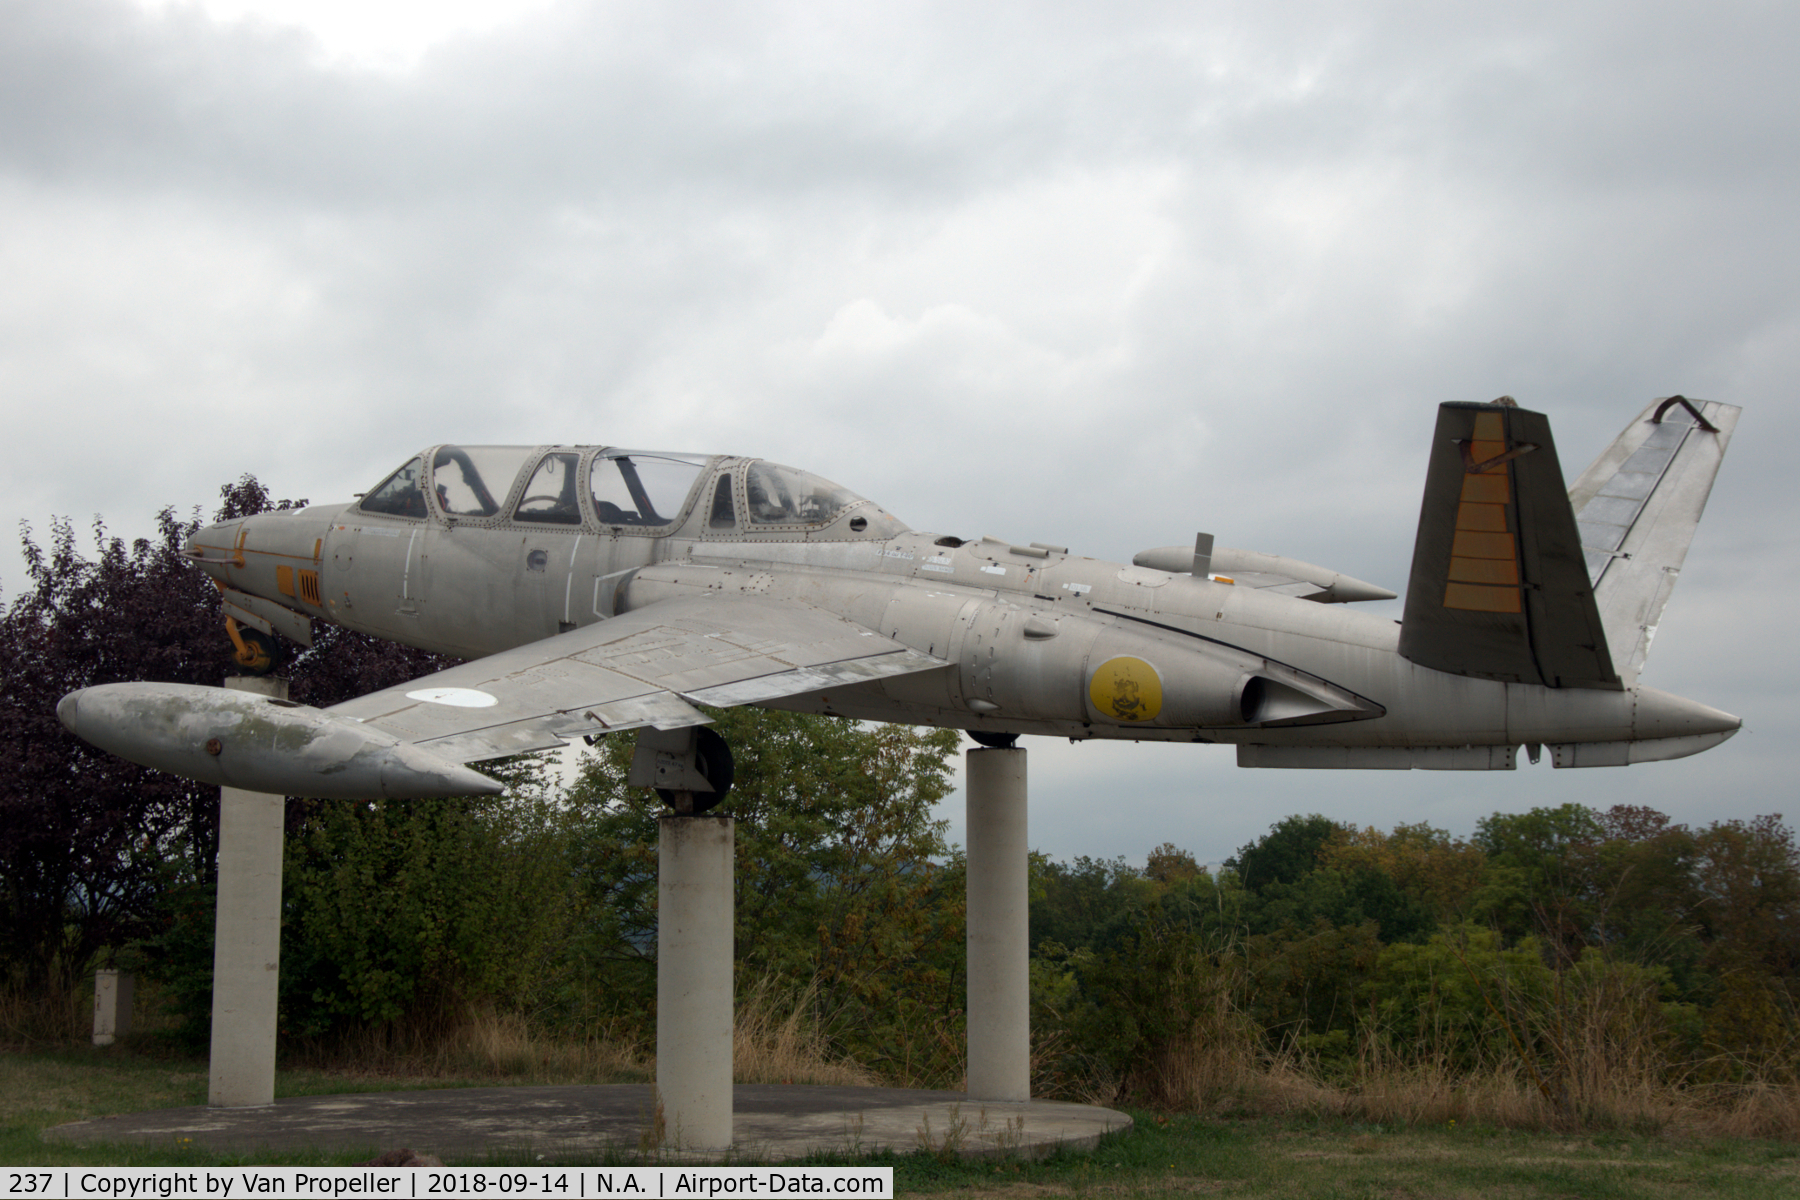 237, 1959 Fouga CM-170R Magister C/N 237, Fouga CM.170 Magister on poles on the roadside near Loudes airport in France. Unfortunately in bad shape, corroded and parts missing